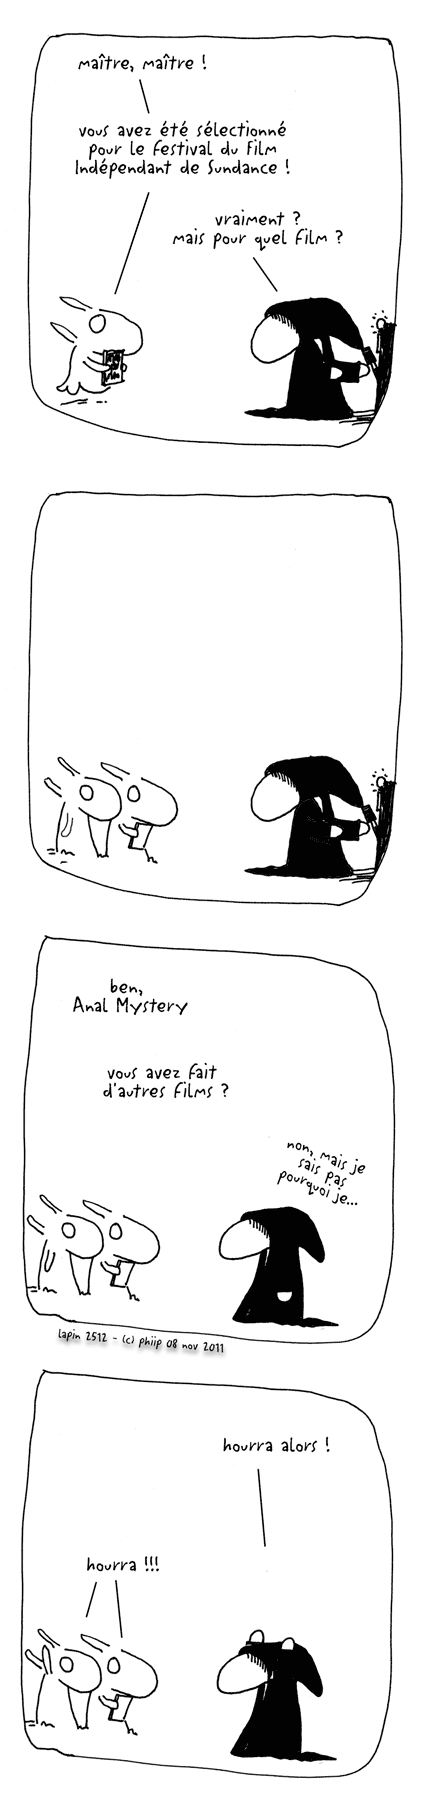 Anal Mystery